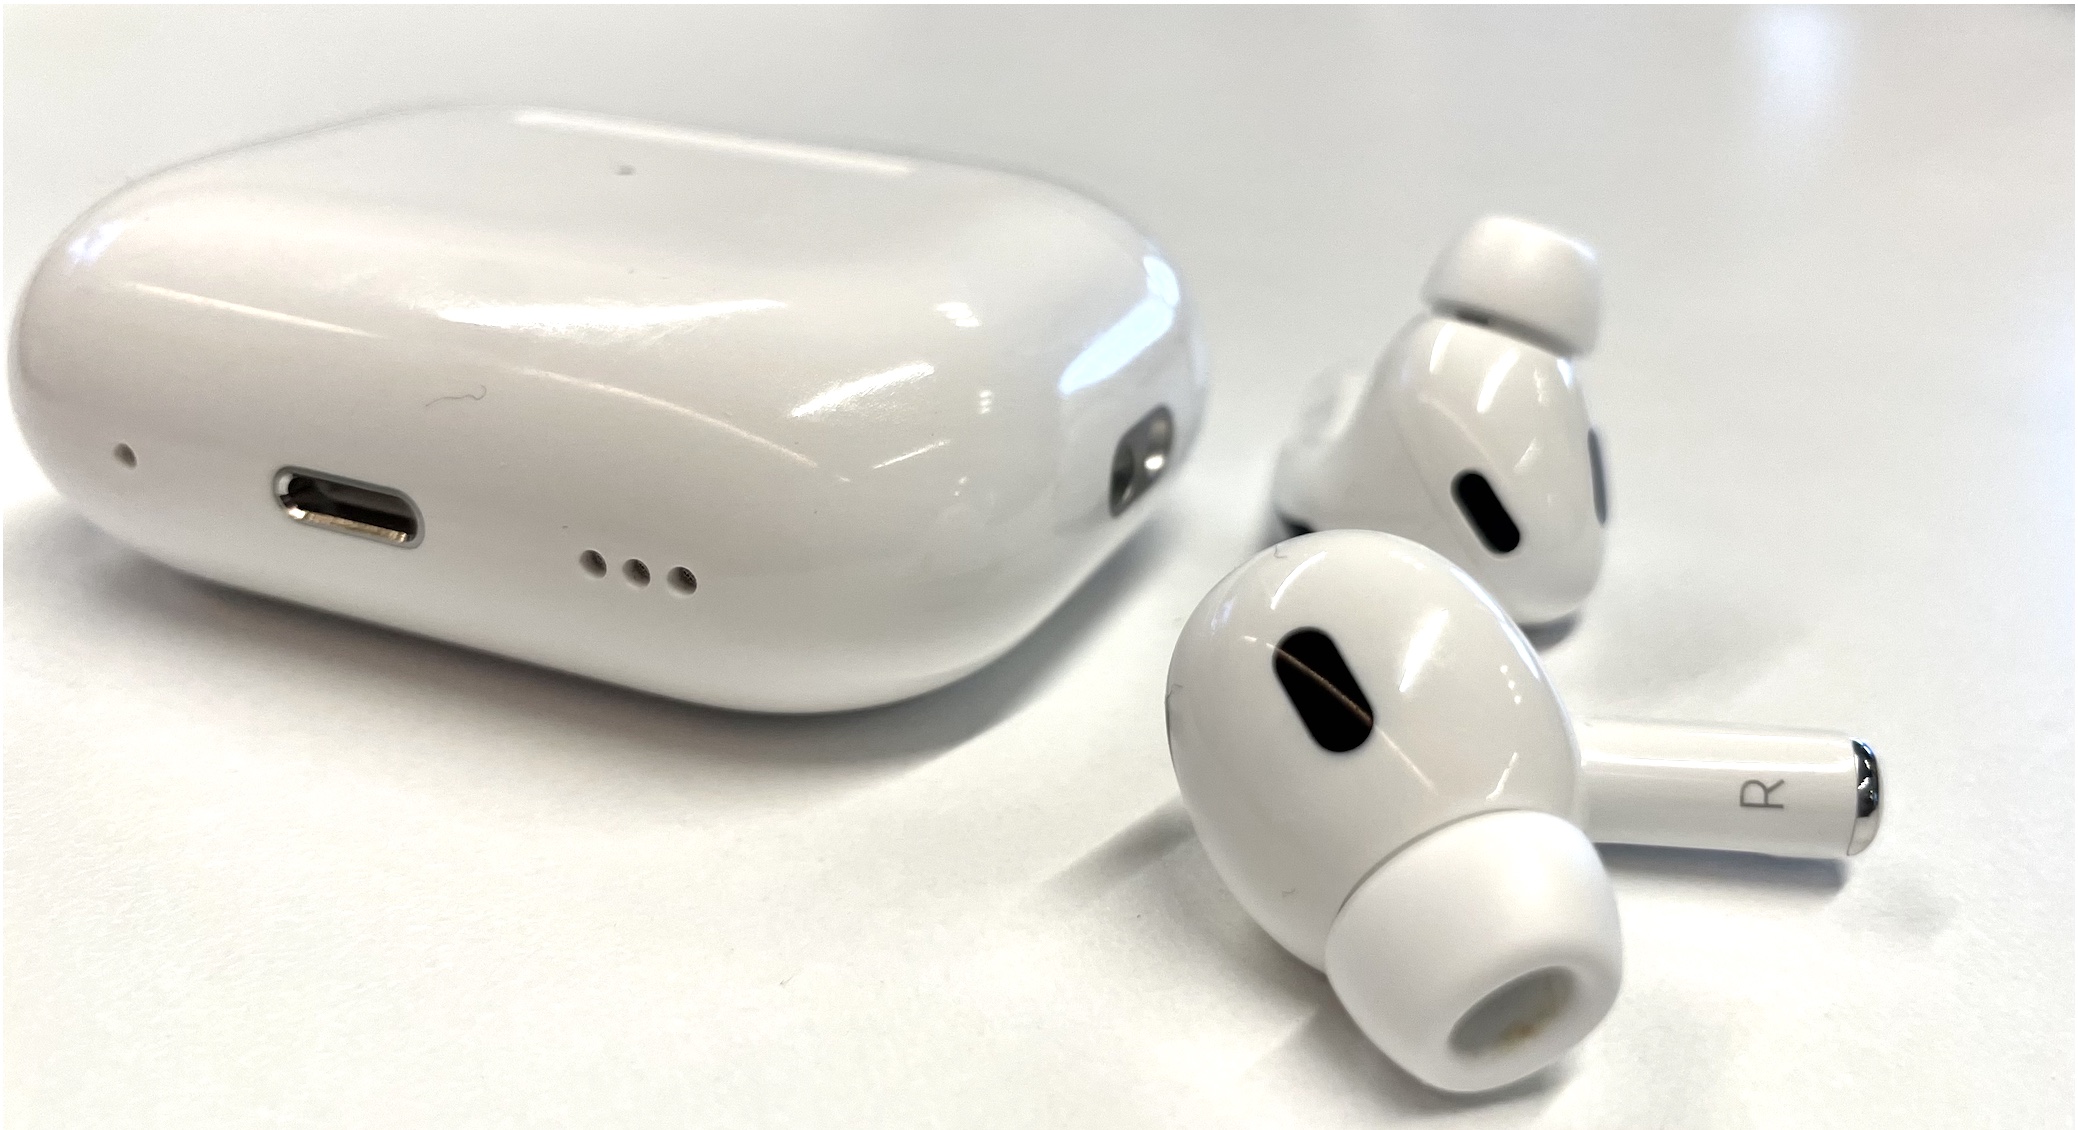 AirPods Pro 2nd generation with MagSafe Charging Case (USB-C)